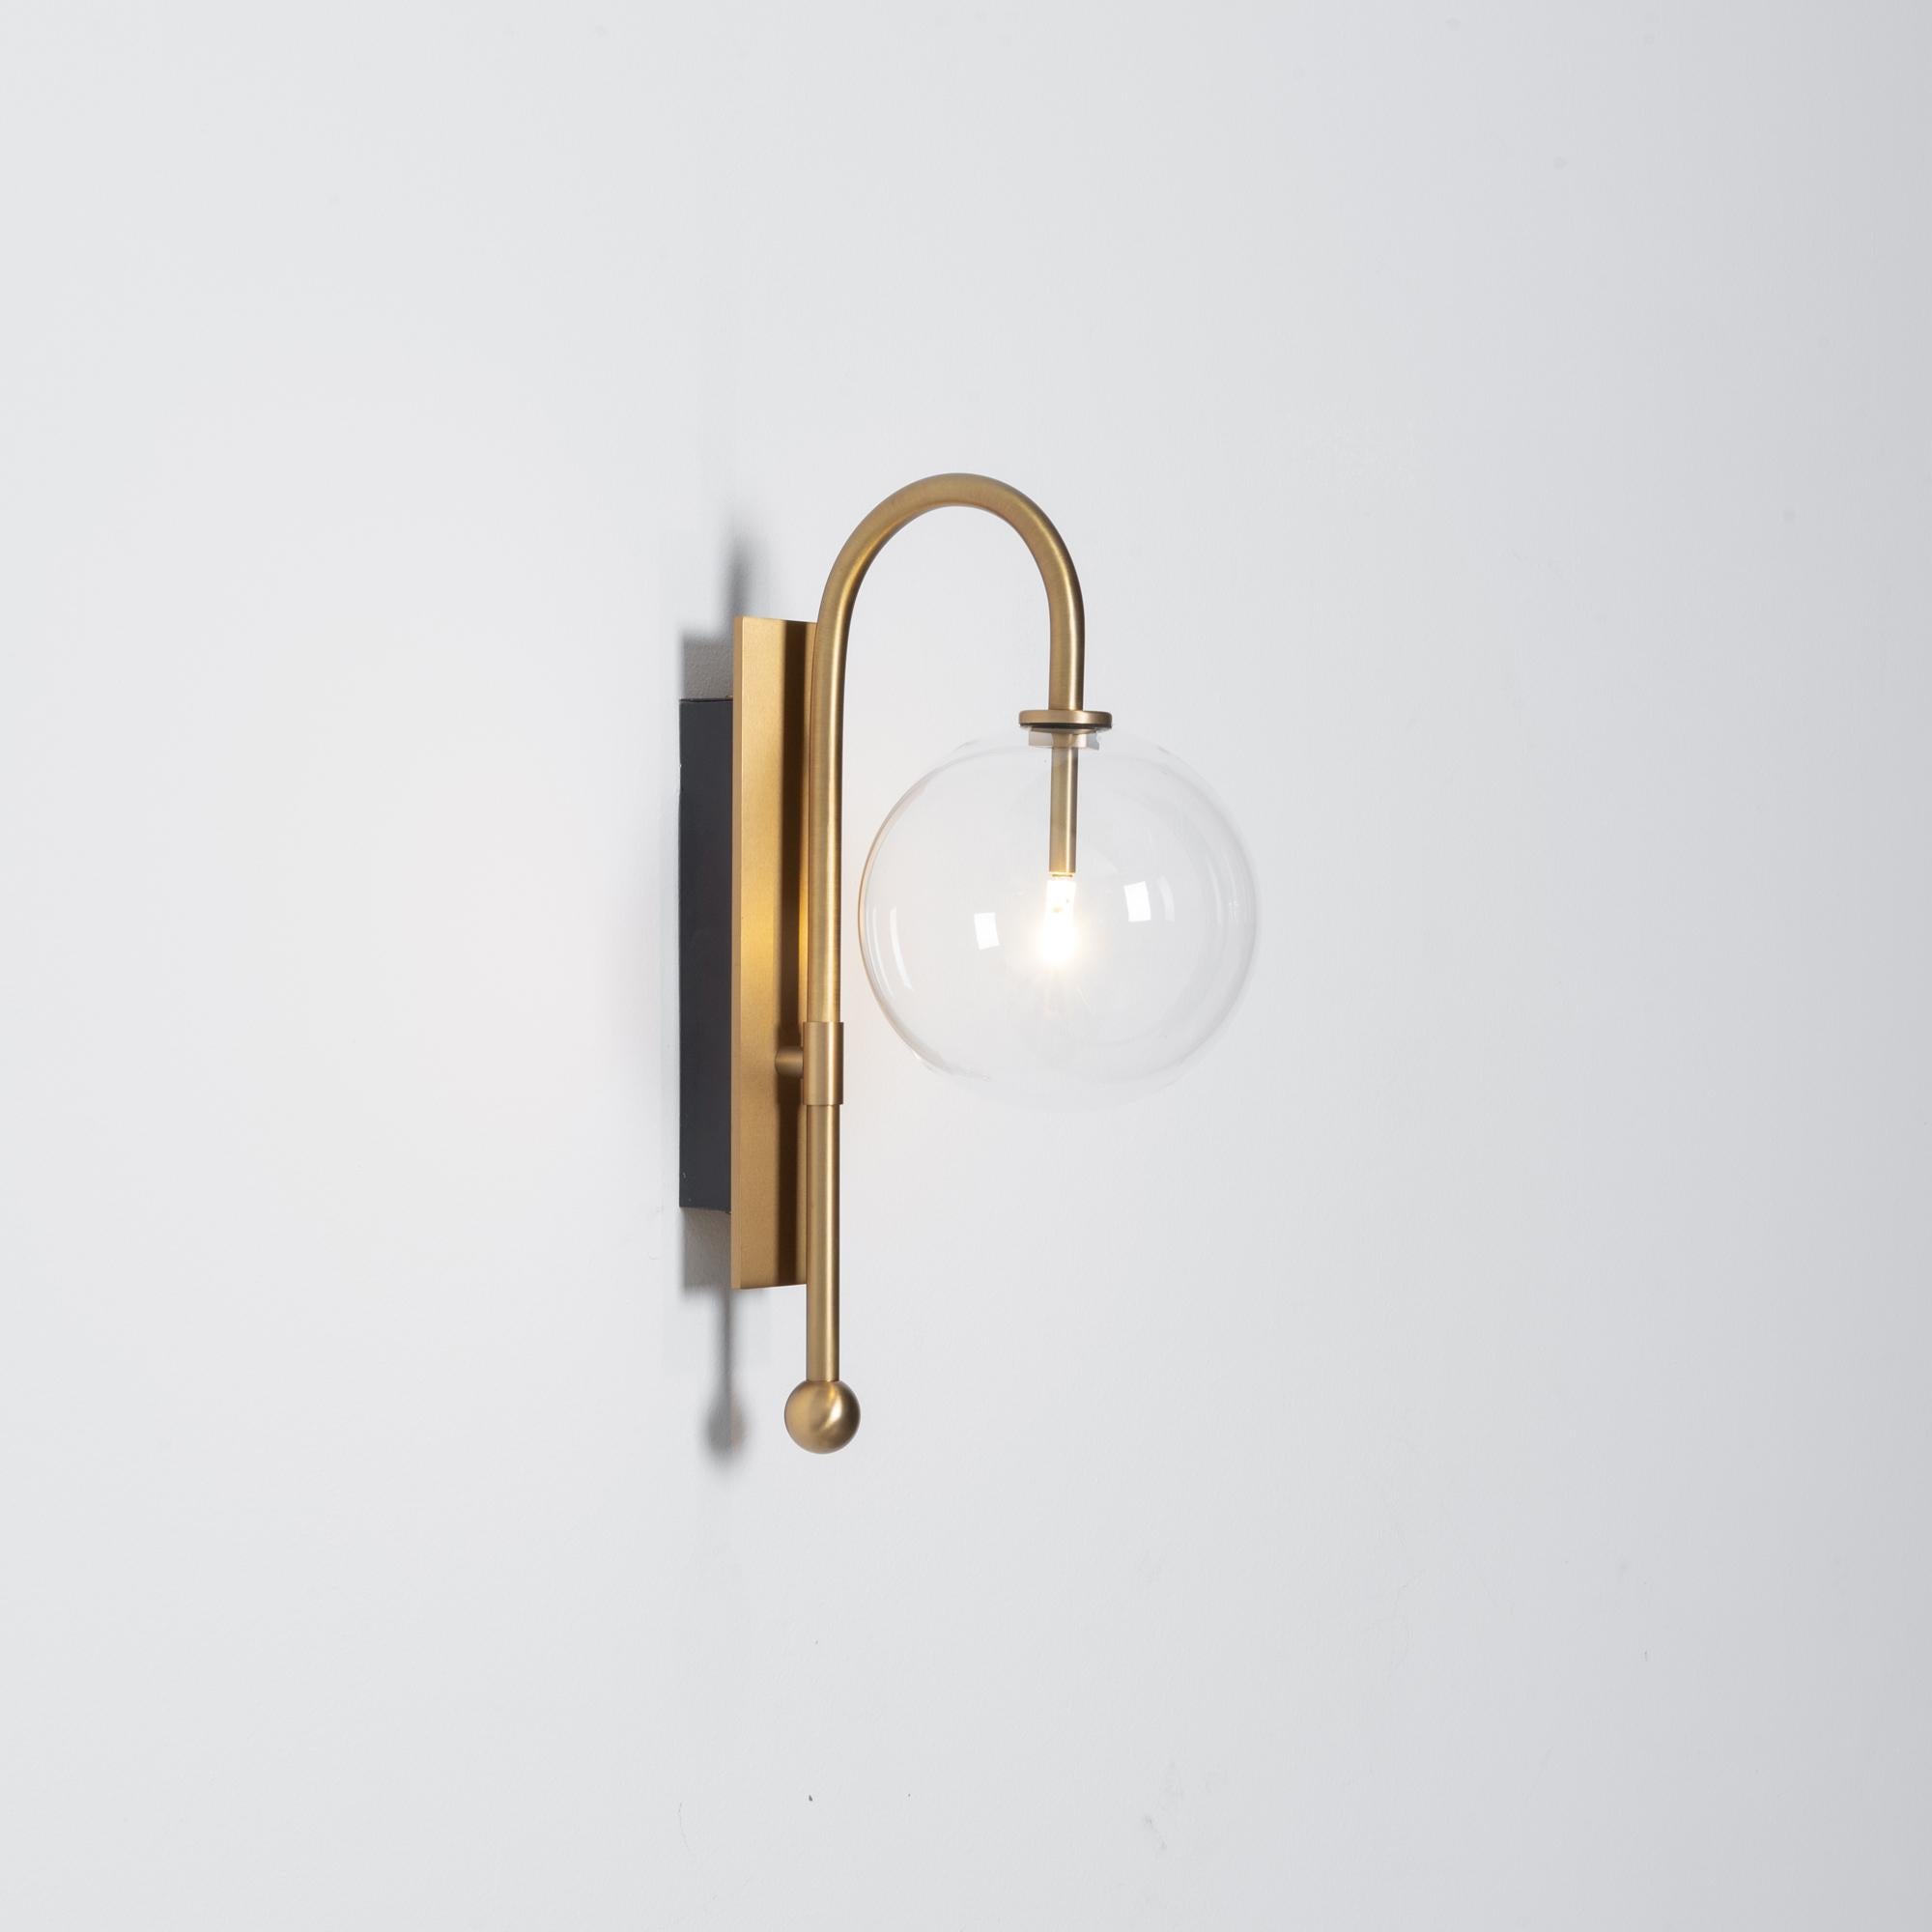 Polish Naples Wall Sconce by Schwung